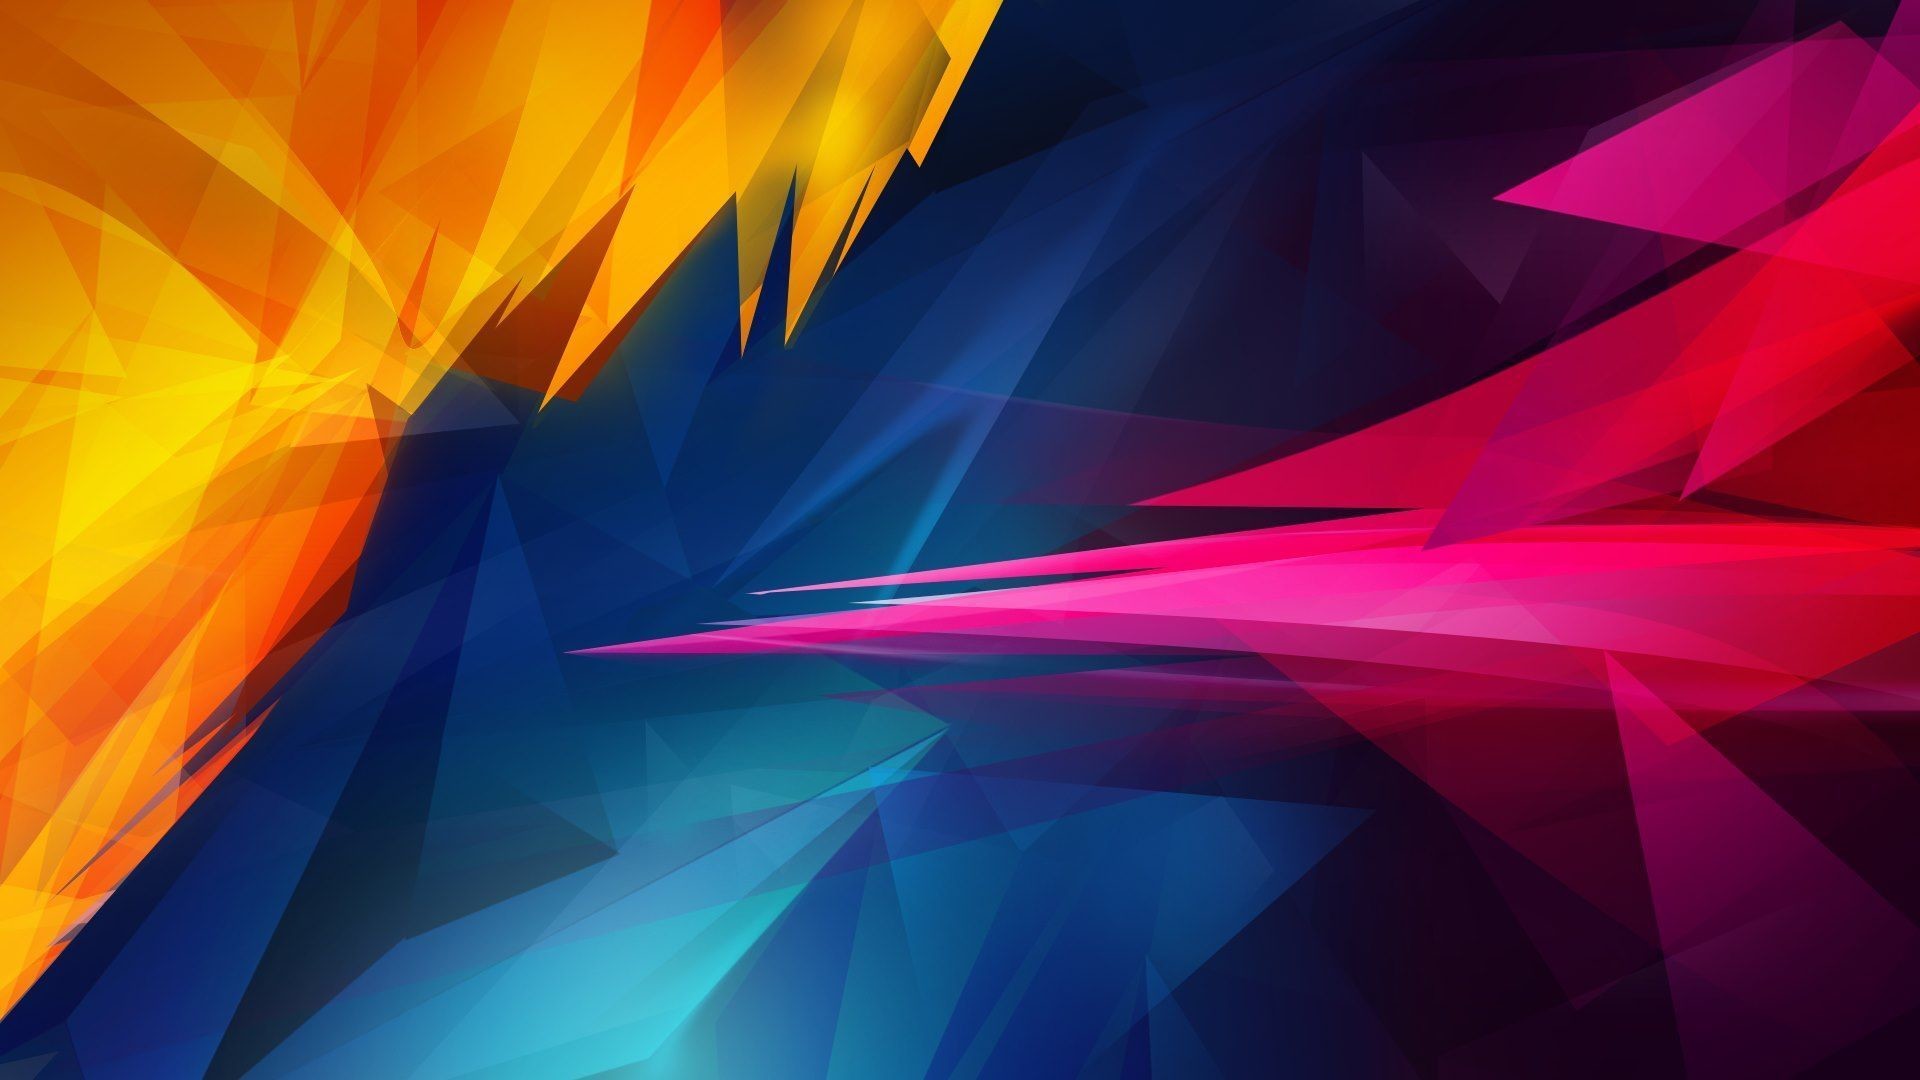 1920x1080 Abstract Sharp Shapes uhd wallpapers - Ultra High Definition .